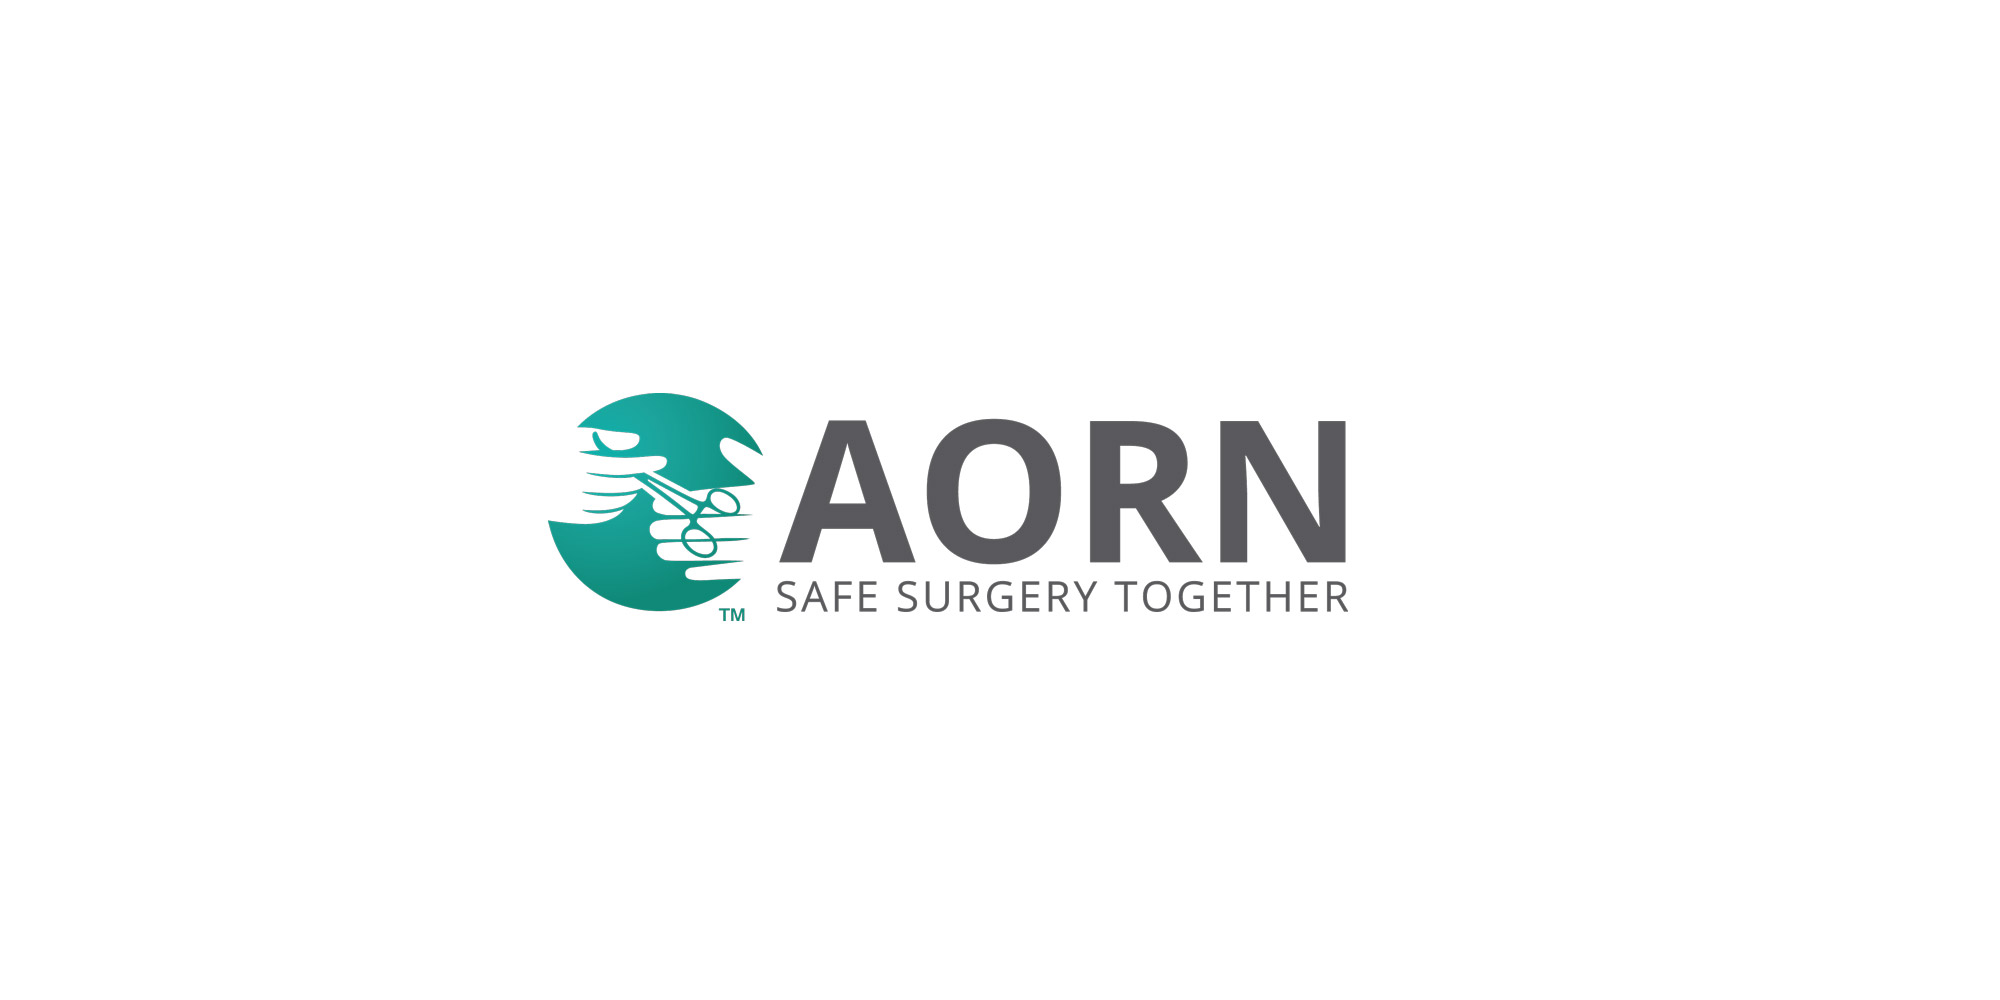 Amber Wood, MSN, RN, CNOR, CIC, FAPIC Senior Perioperative Practice Specialist at AORN